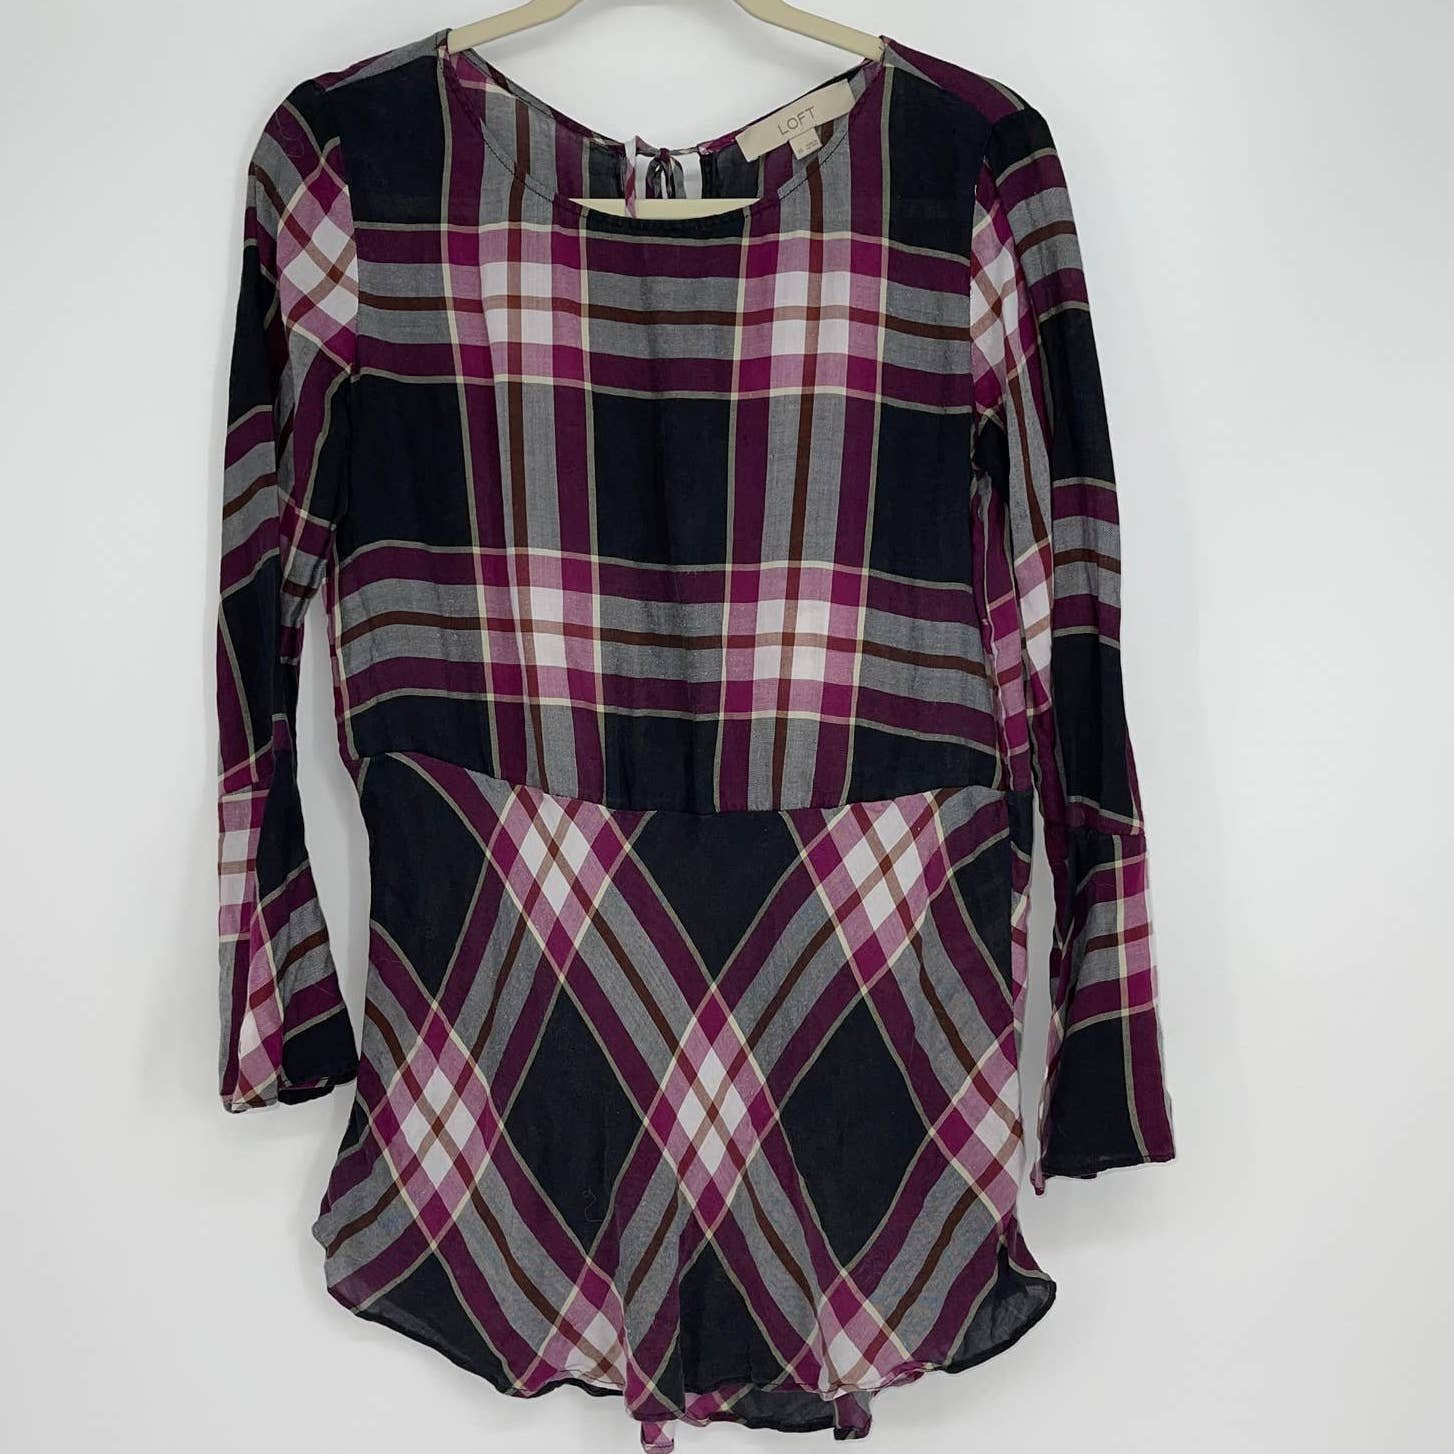 Latest  LOFT PLAID DESIGN LIGHTWEIGHT SOFT LONG SLEEVE LYOCELL PULLOVER TOP SIZE XS Gx6UBQYgw just for you